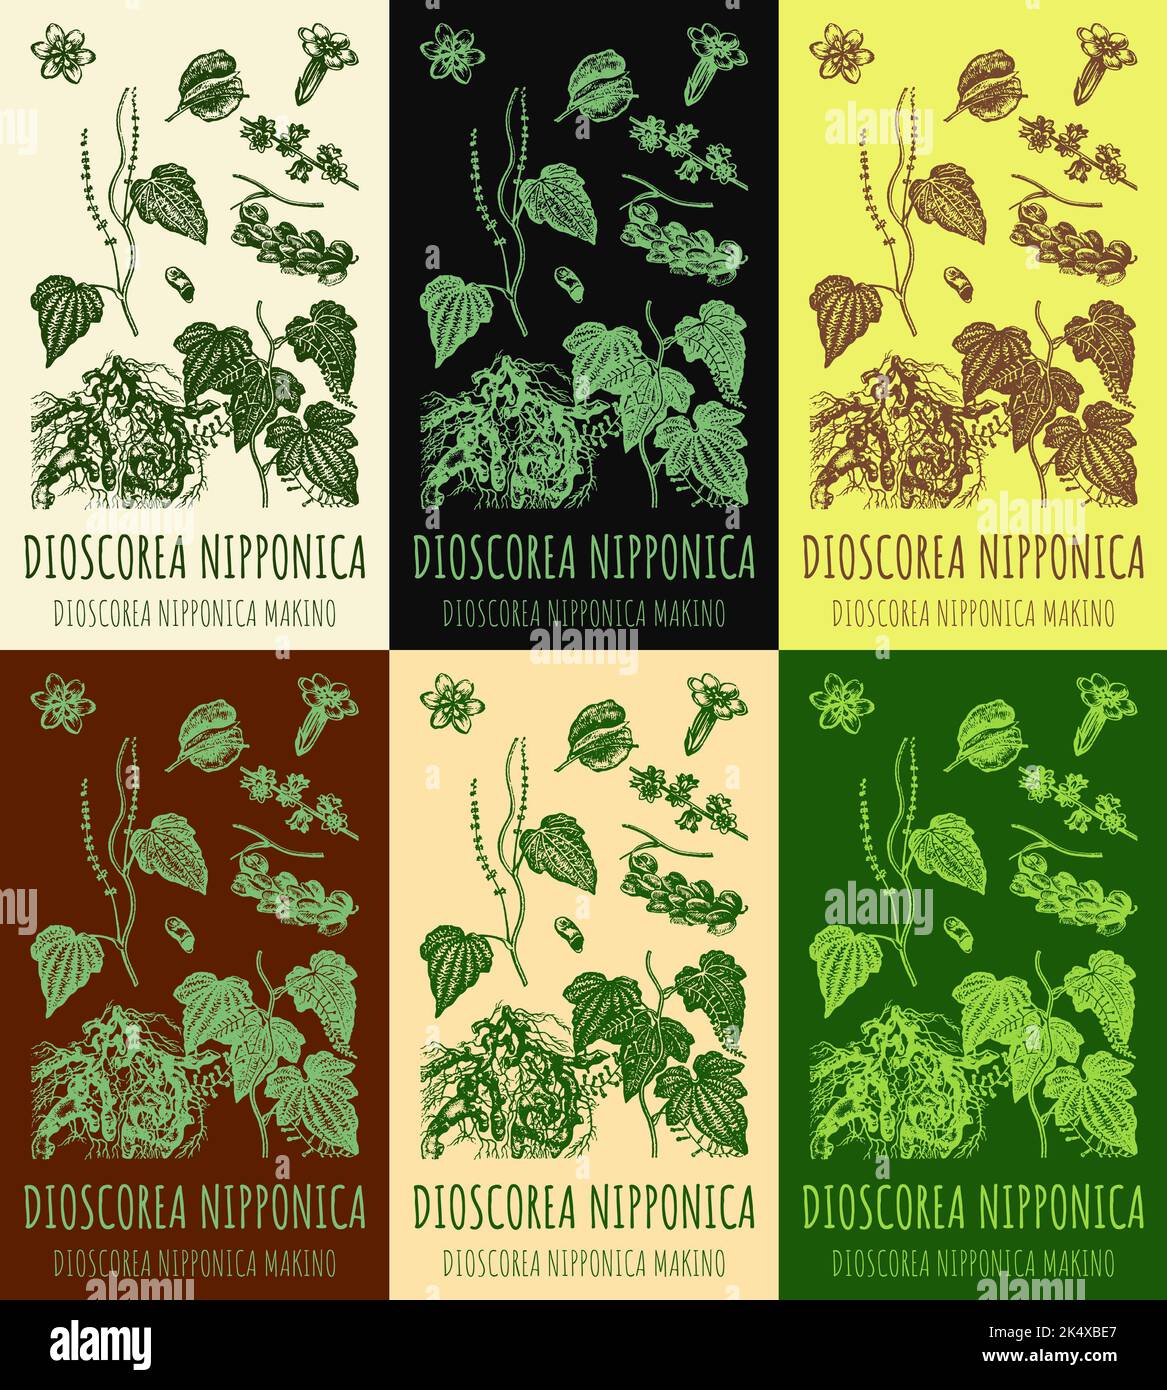 Set of vector drawings of DIOSCOREA NIPPONICA in different colors. Hand drawn illustration. Latin name DIOSCOREA NIPPONICA MAKINO. Stock Photo